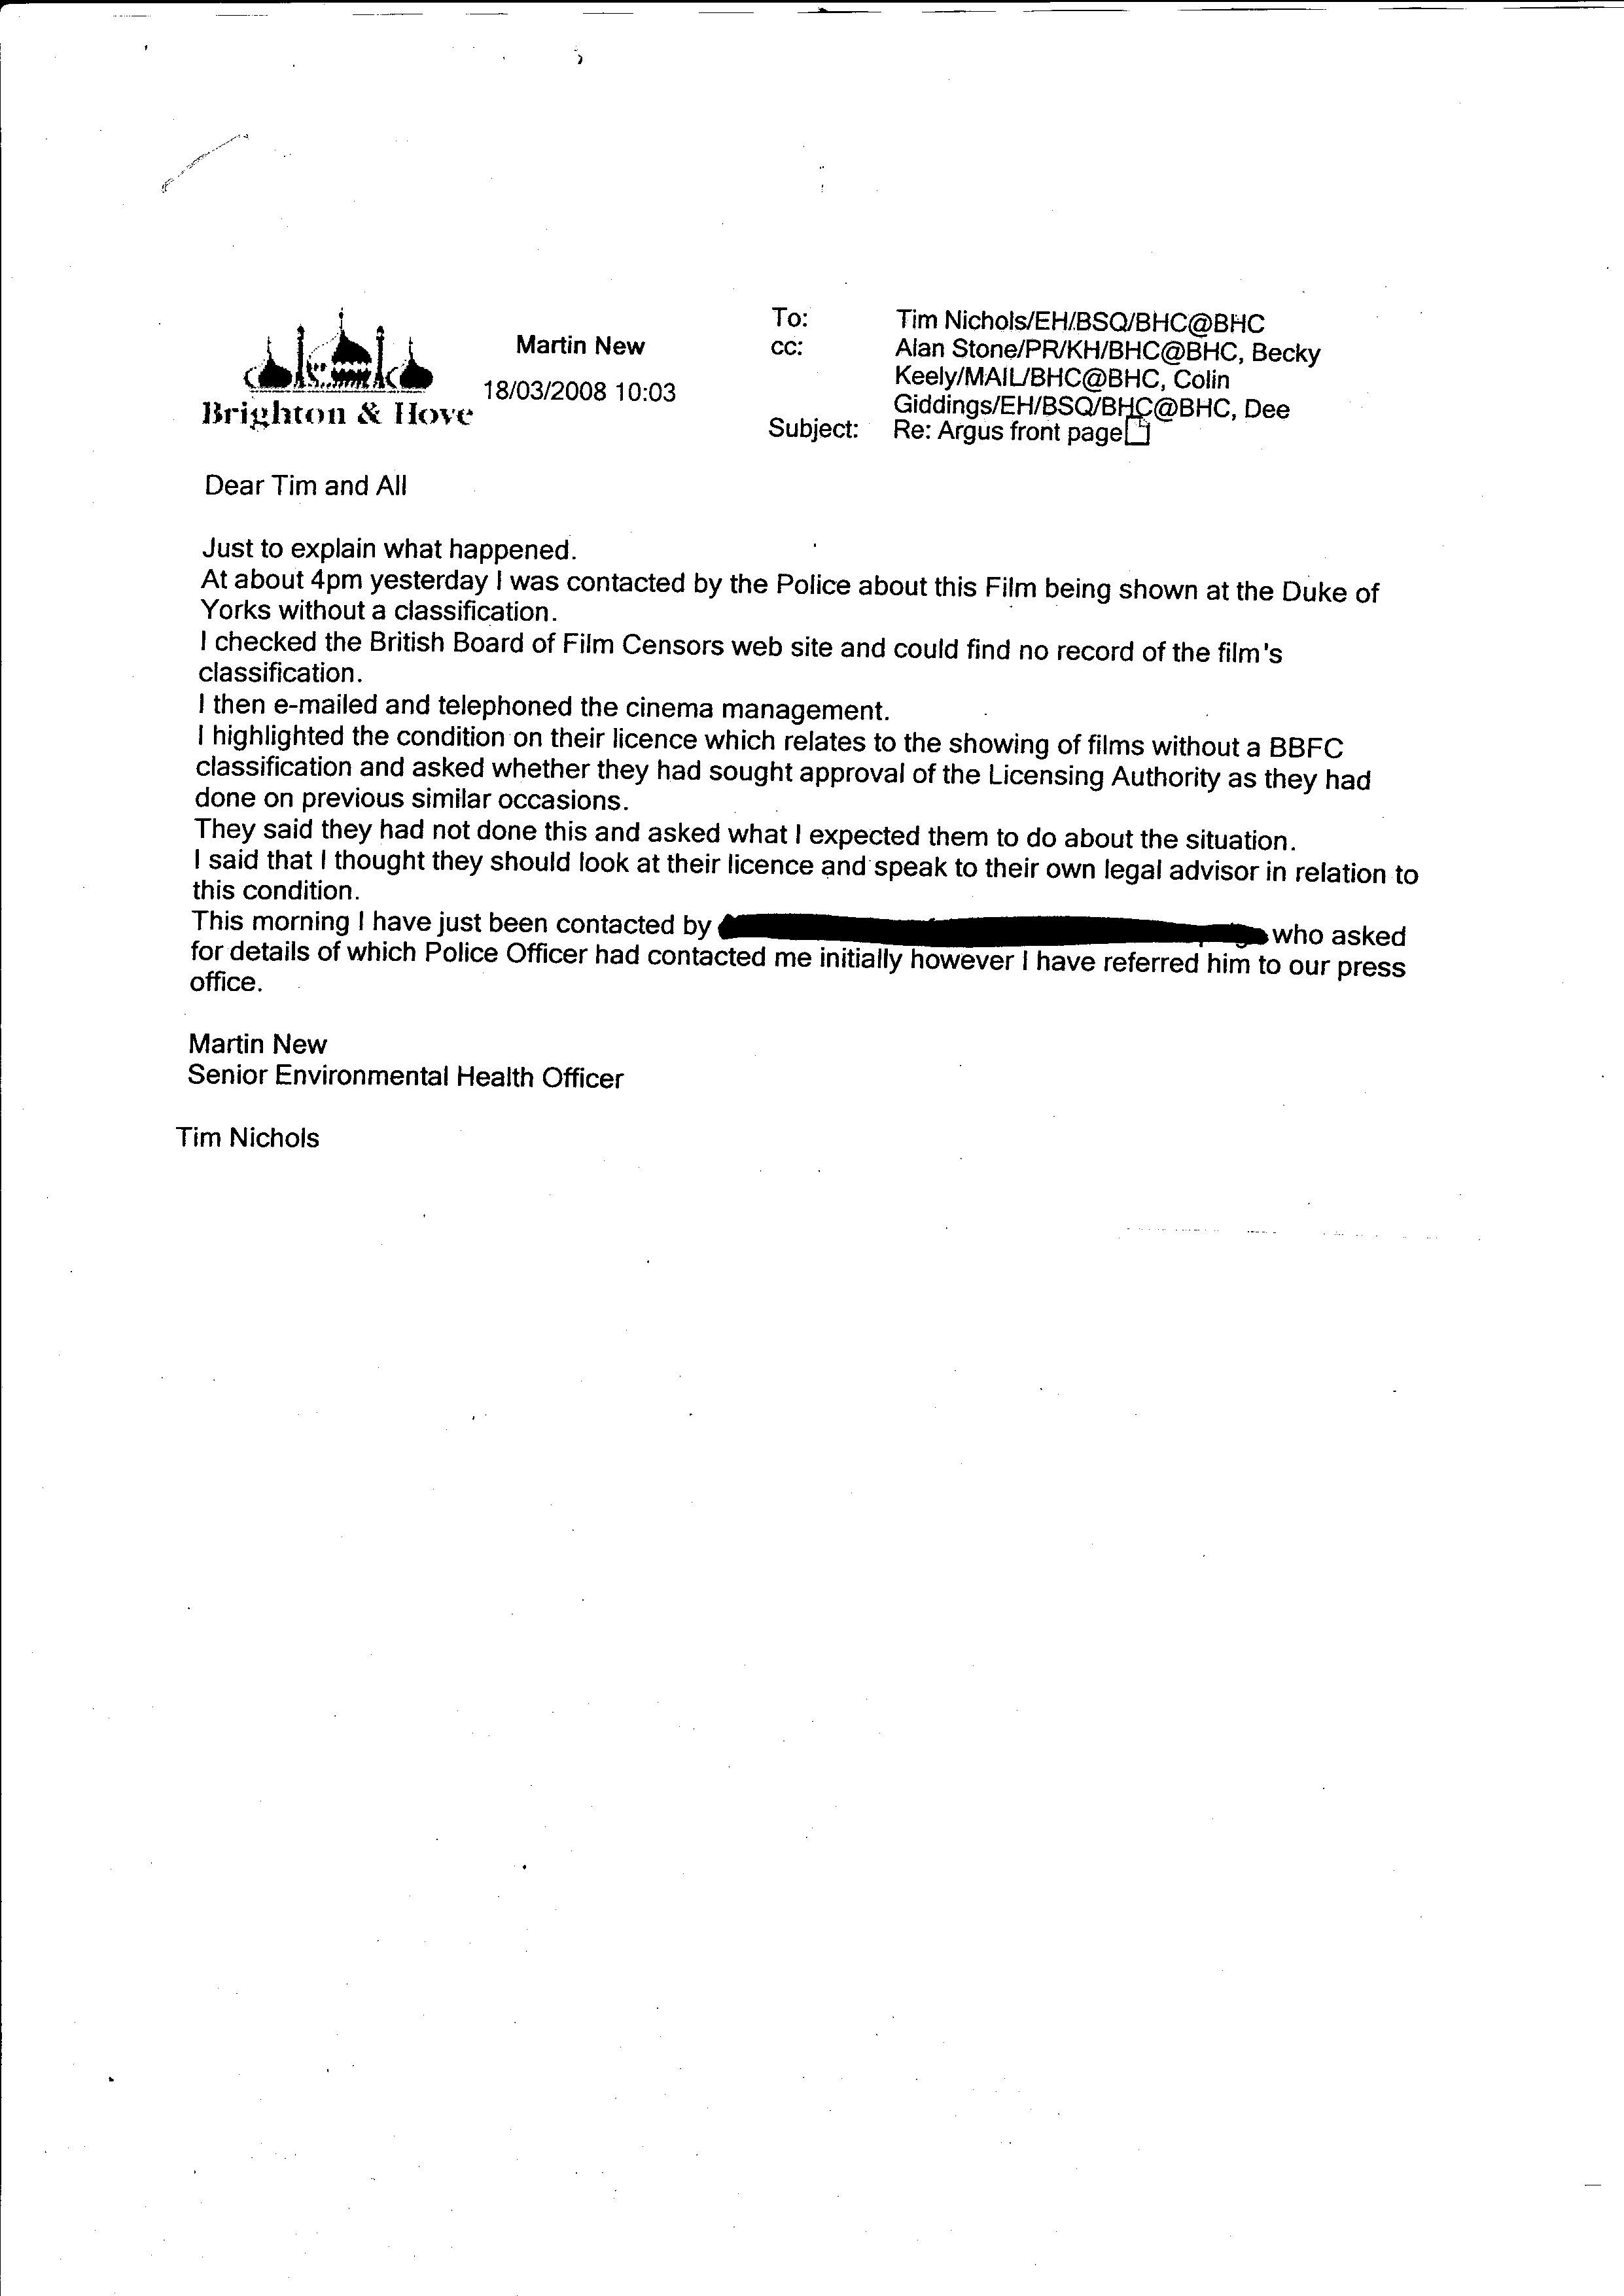 internal BHCC email 18/3 explaining events (redacted)